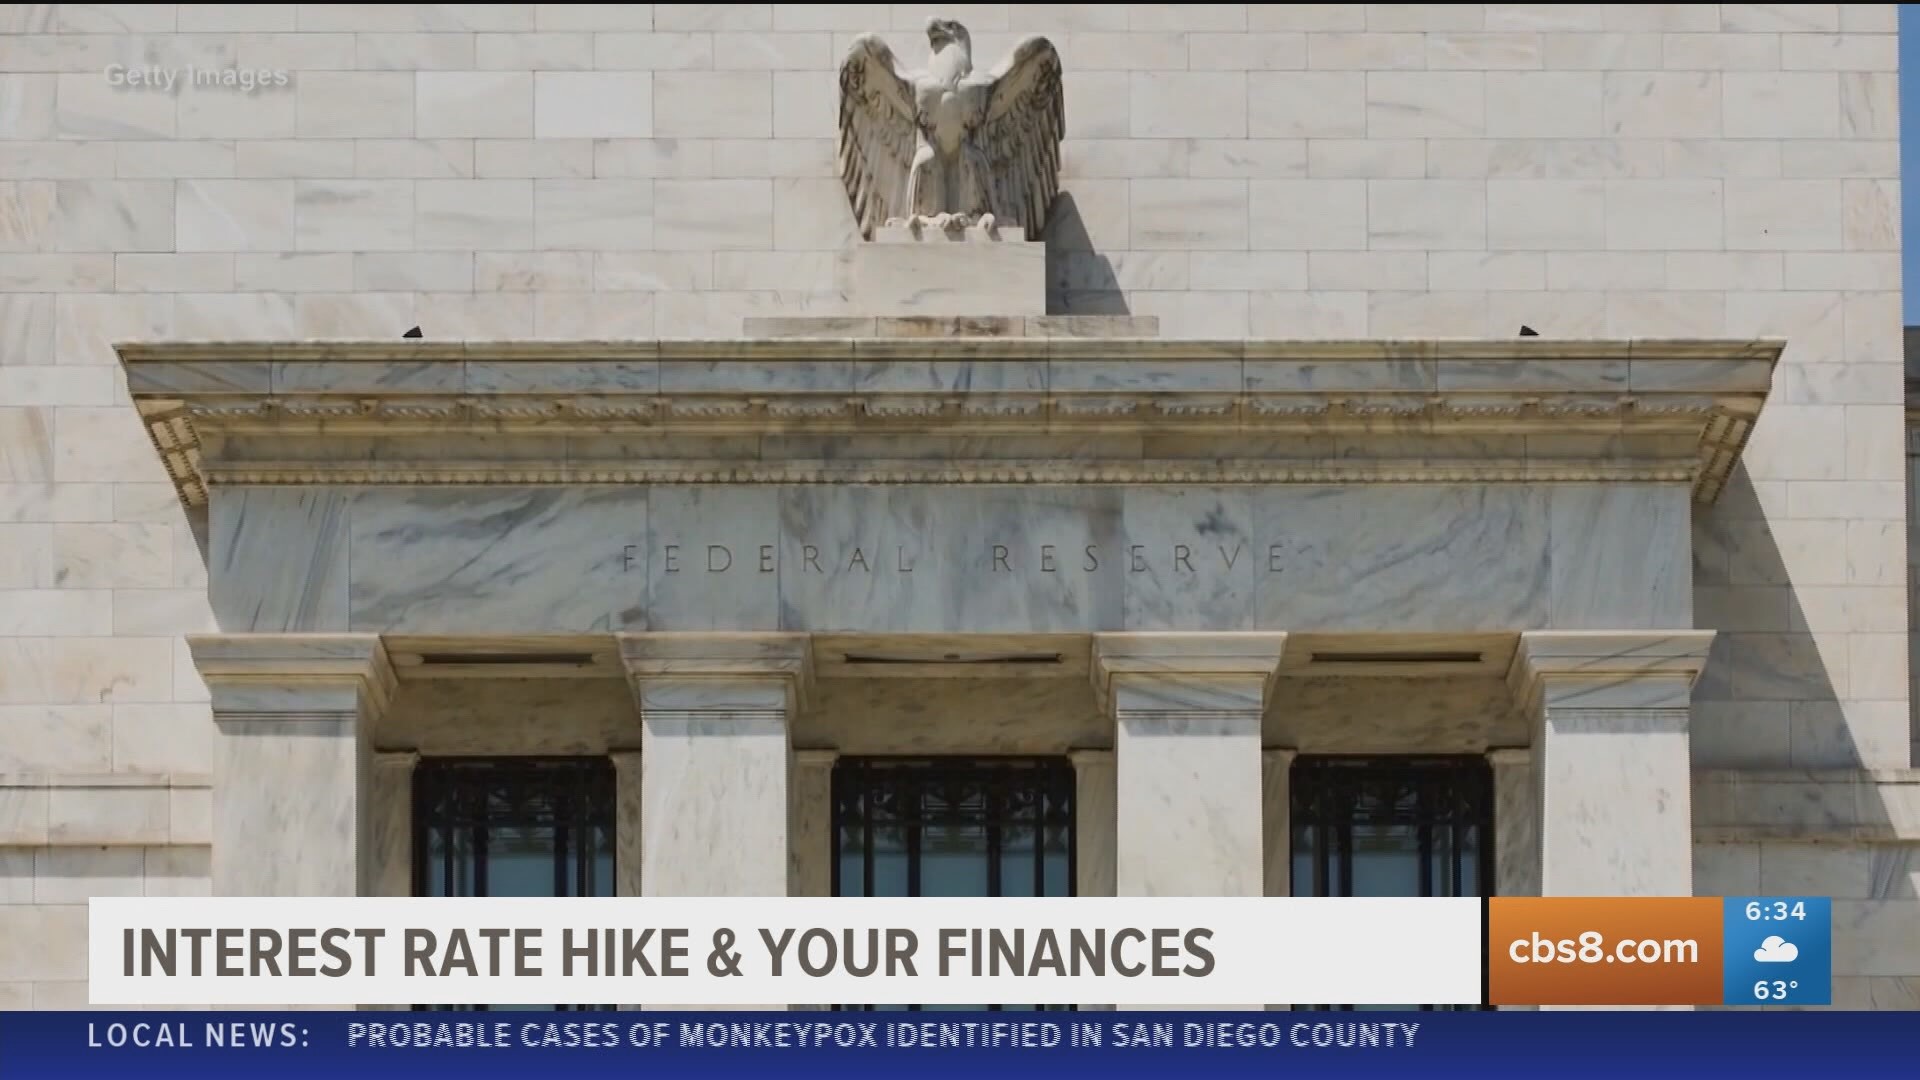 Chief Financial Architect at Reyes Financial Architecture, David Reyes explains why the rates were raised and what it means for the average consumer.